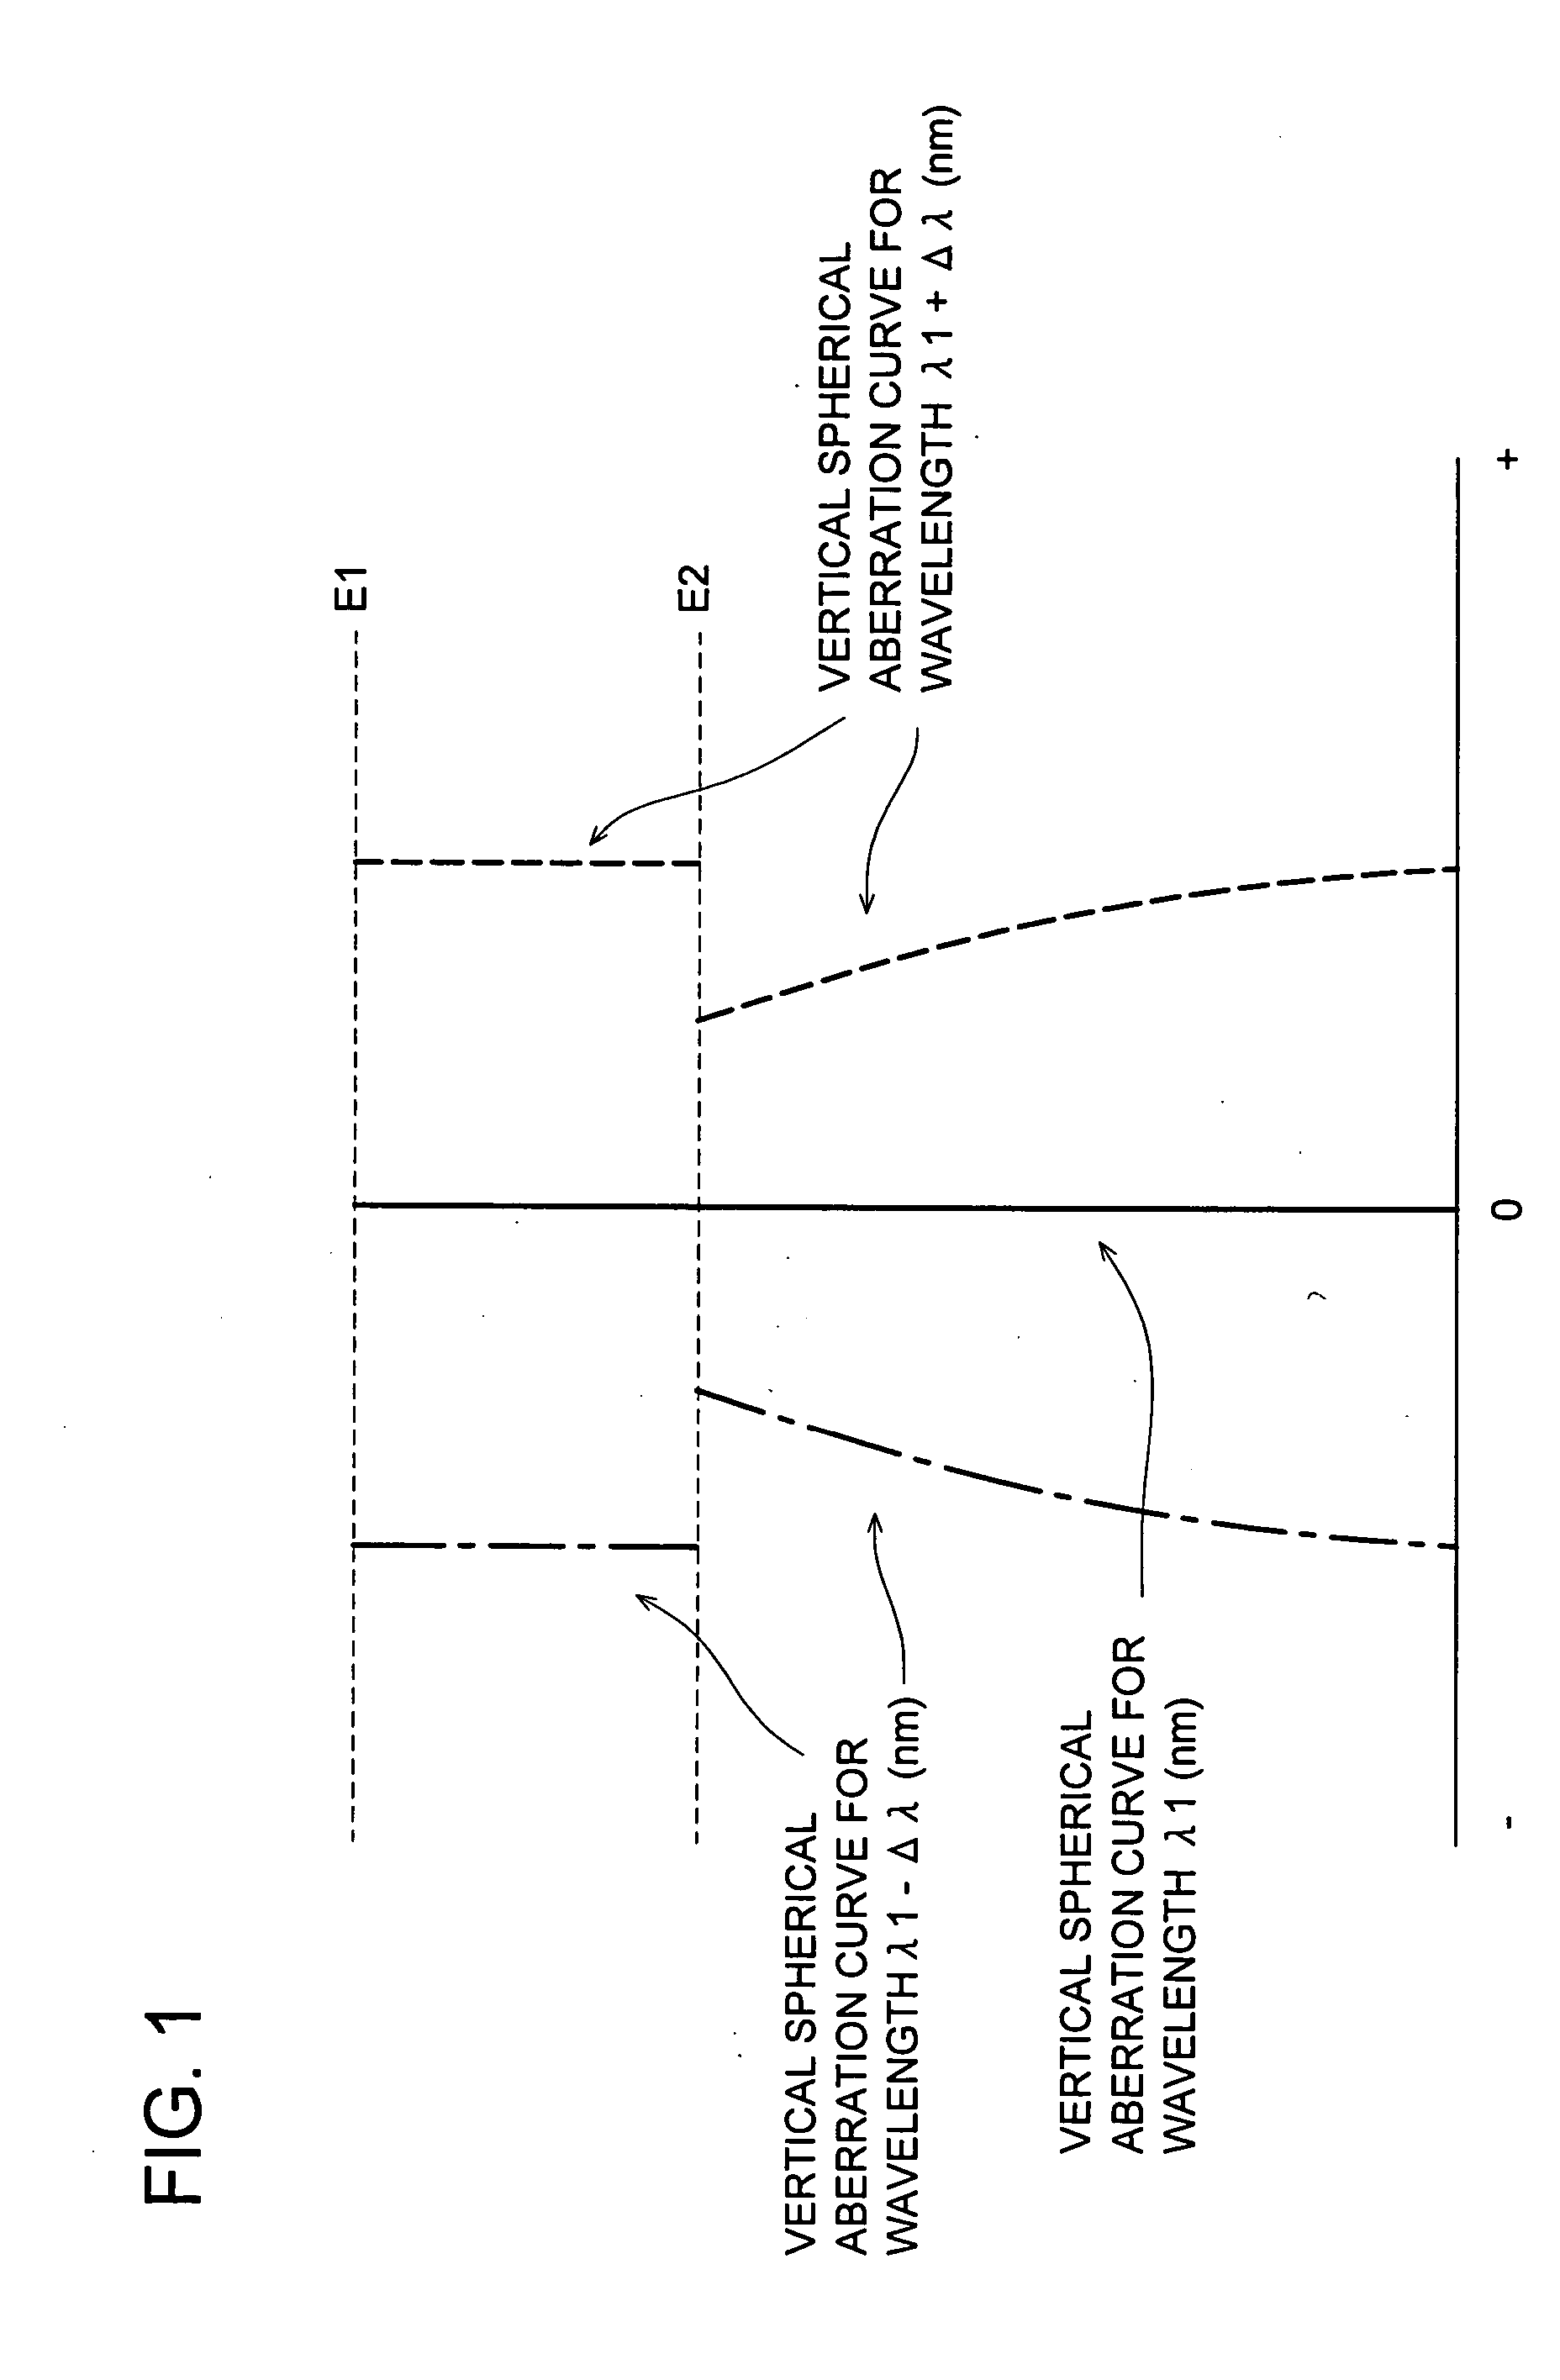 Objective lens, optical pickup apparatus and optical information recording and/ or reproducing apparatus